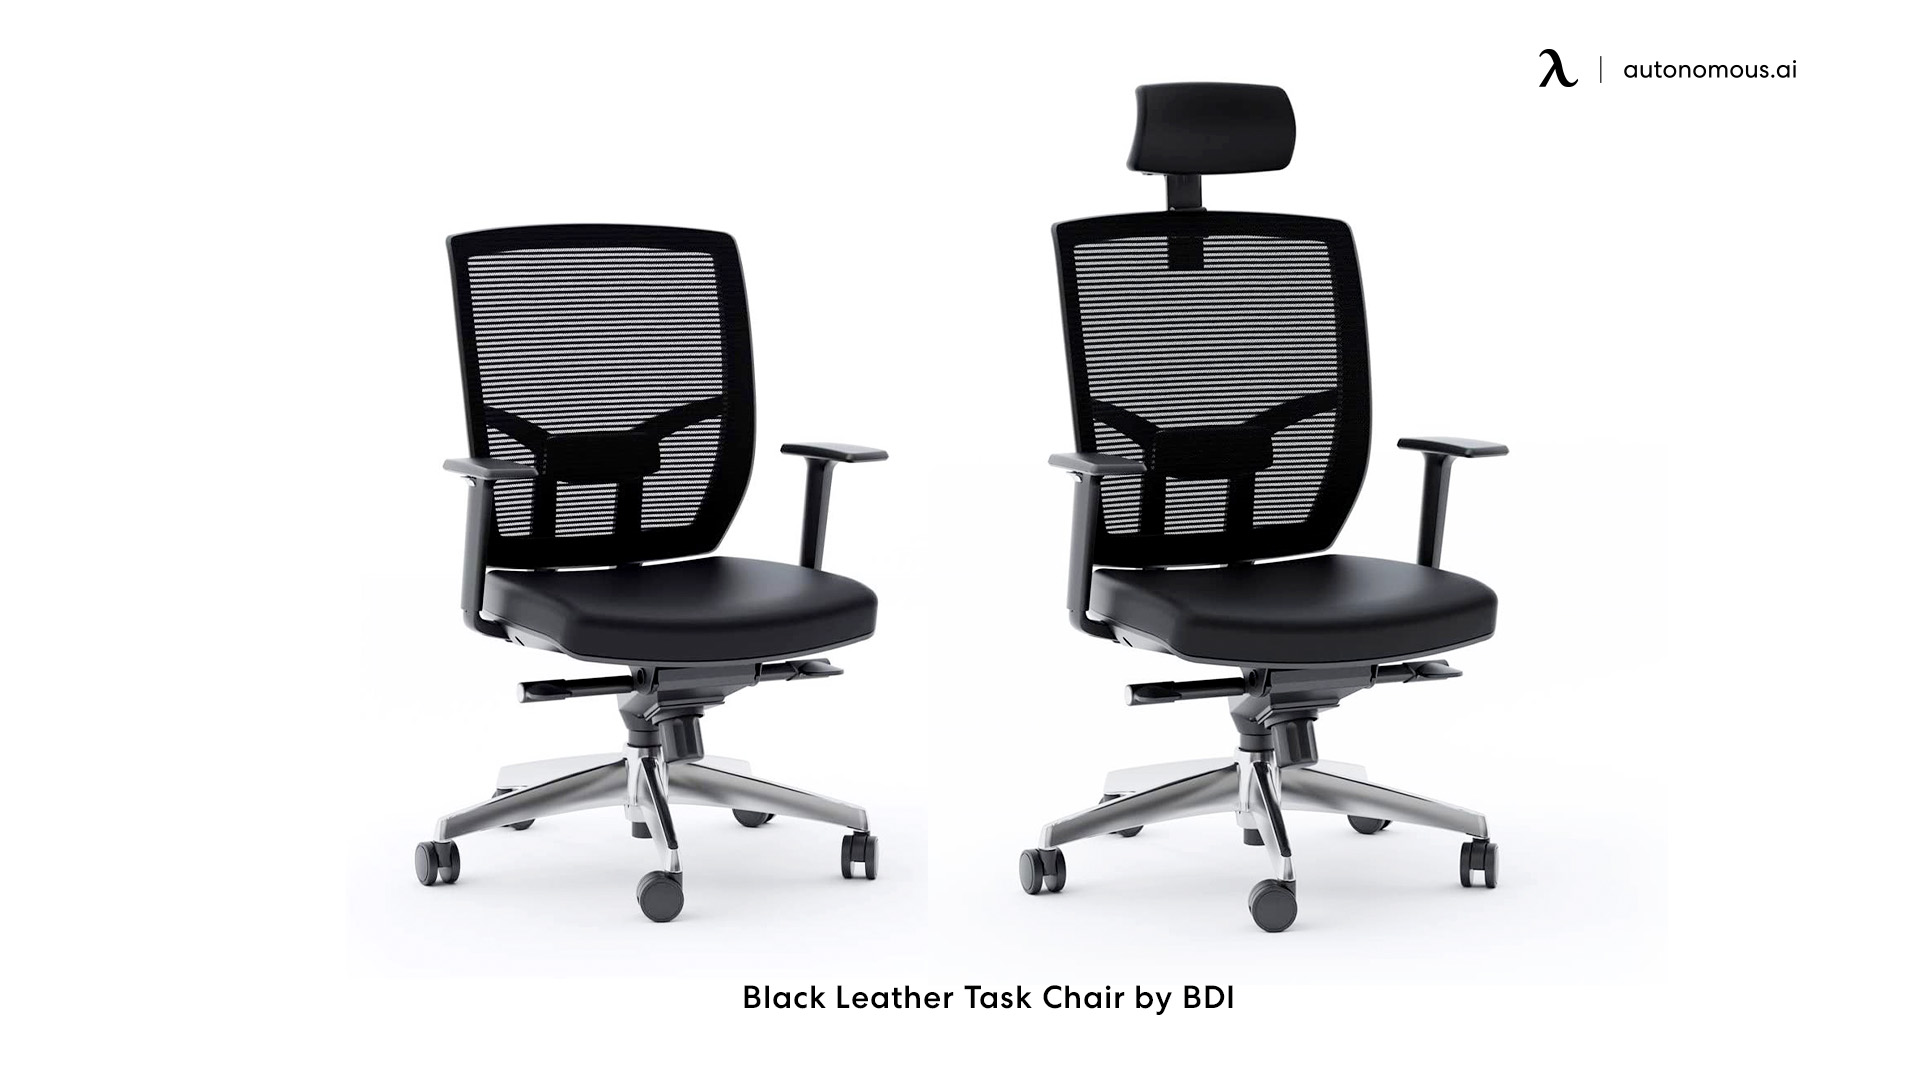 Black Leather Task Chair by BDI